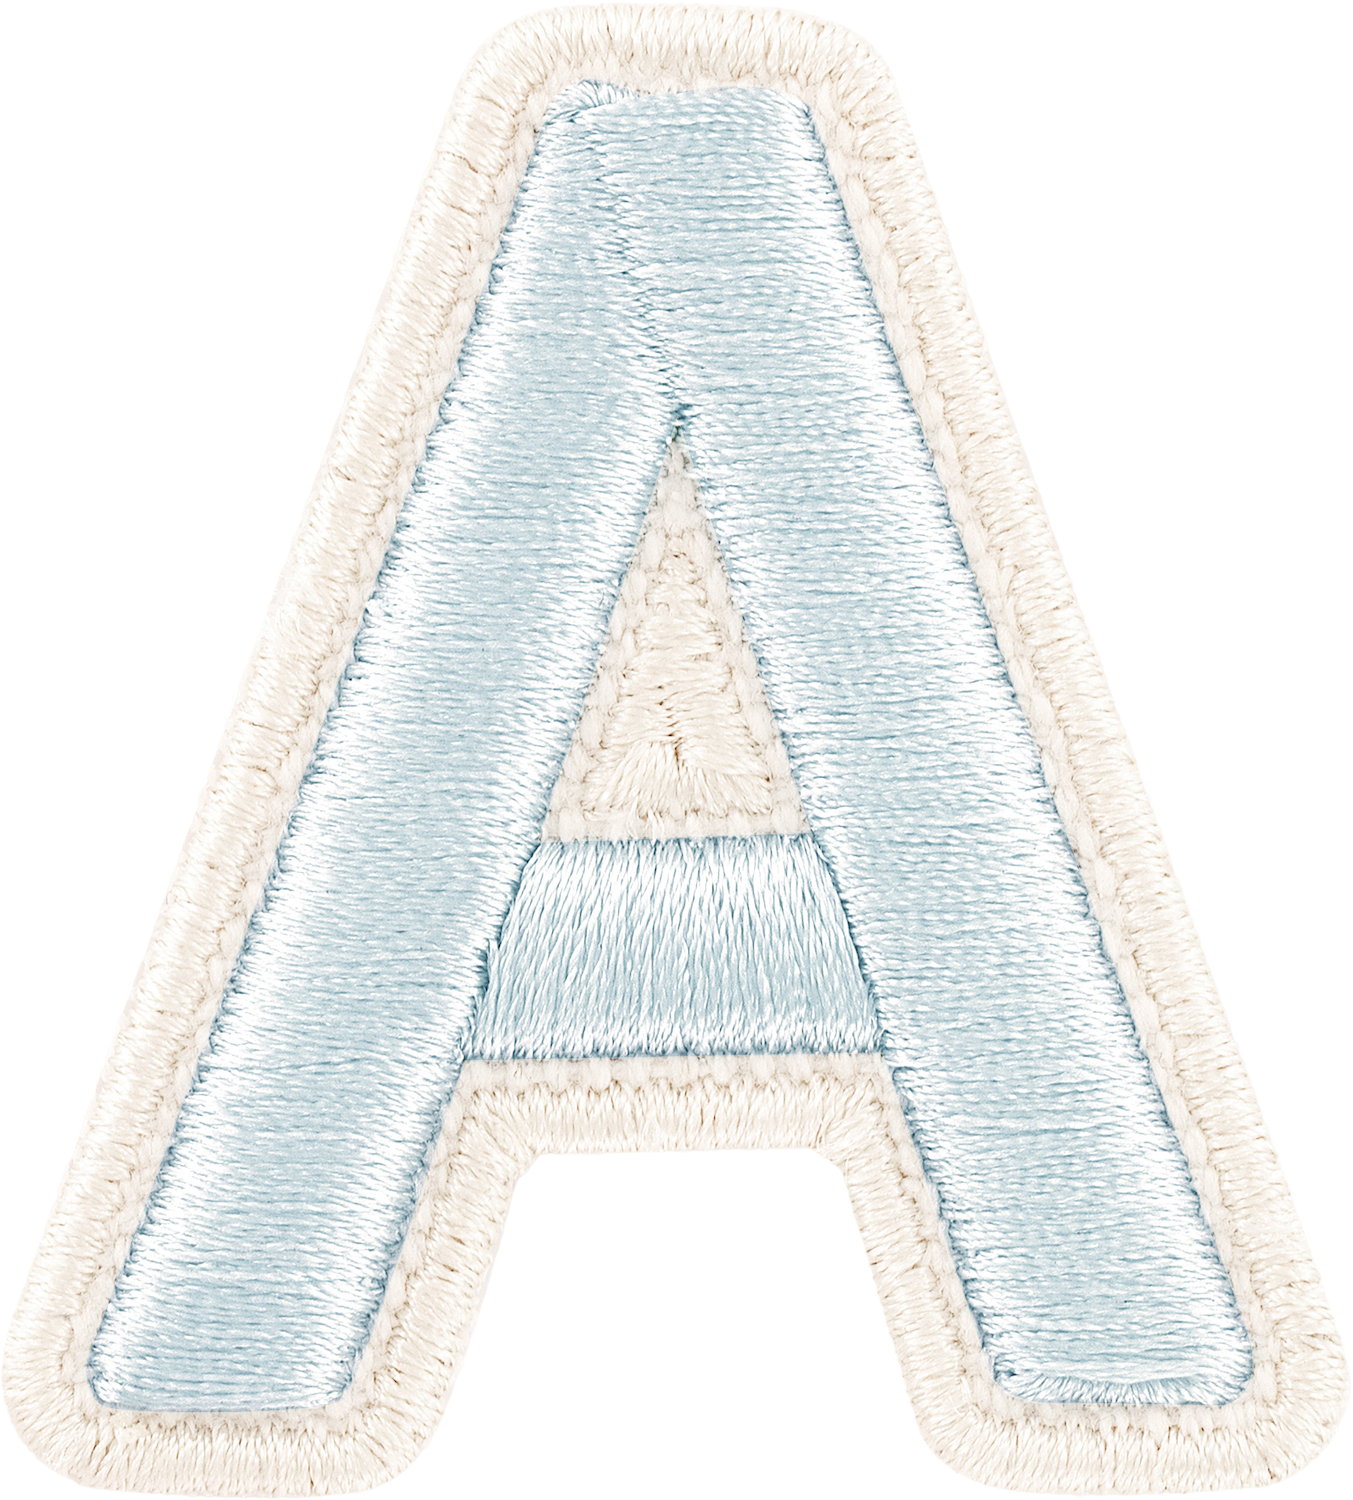 Sky Rolled Embroidery Letter Patches